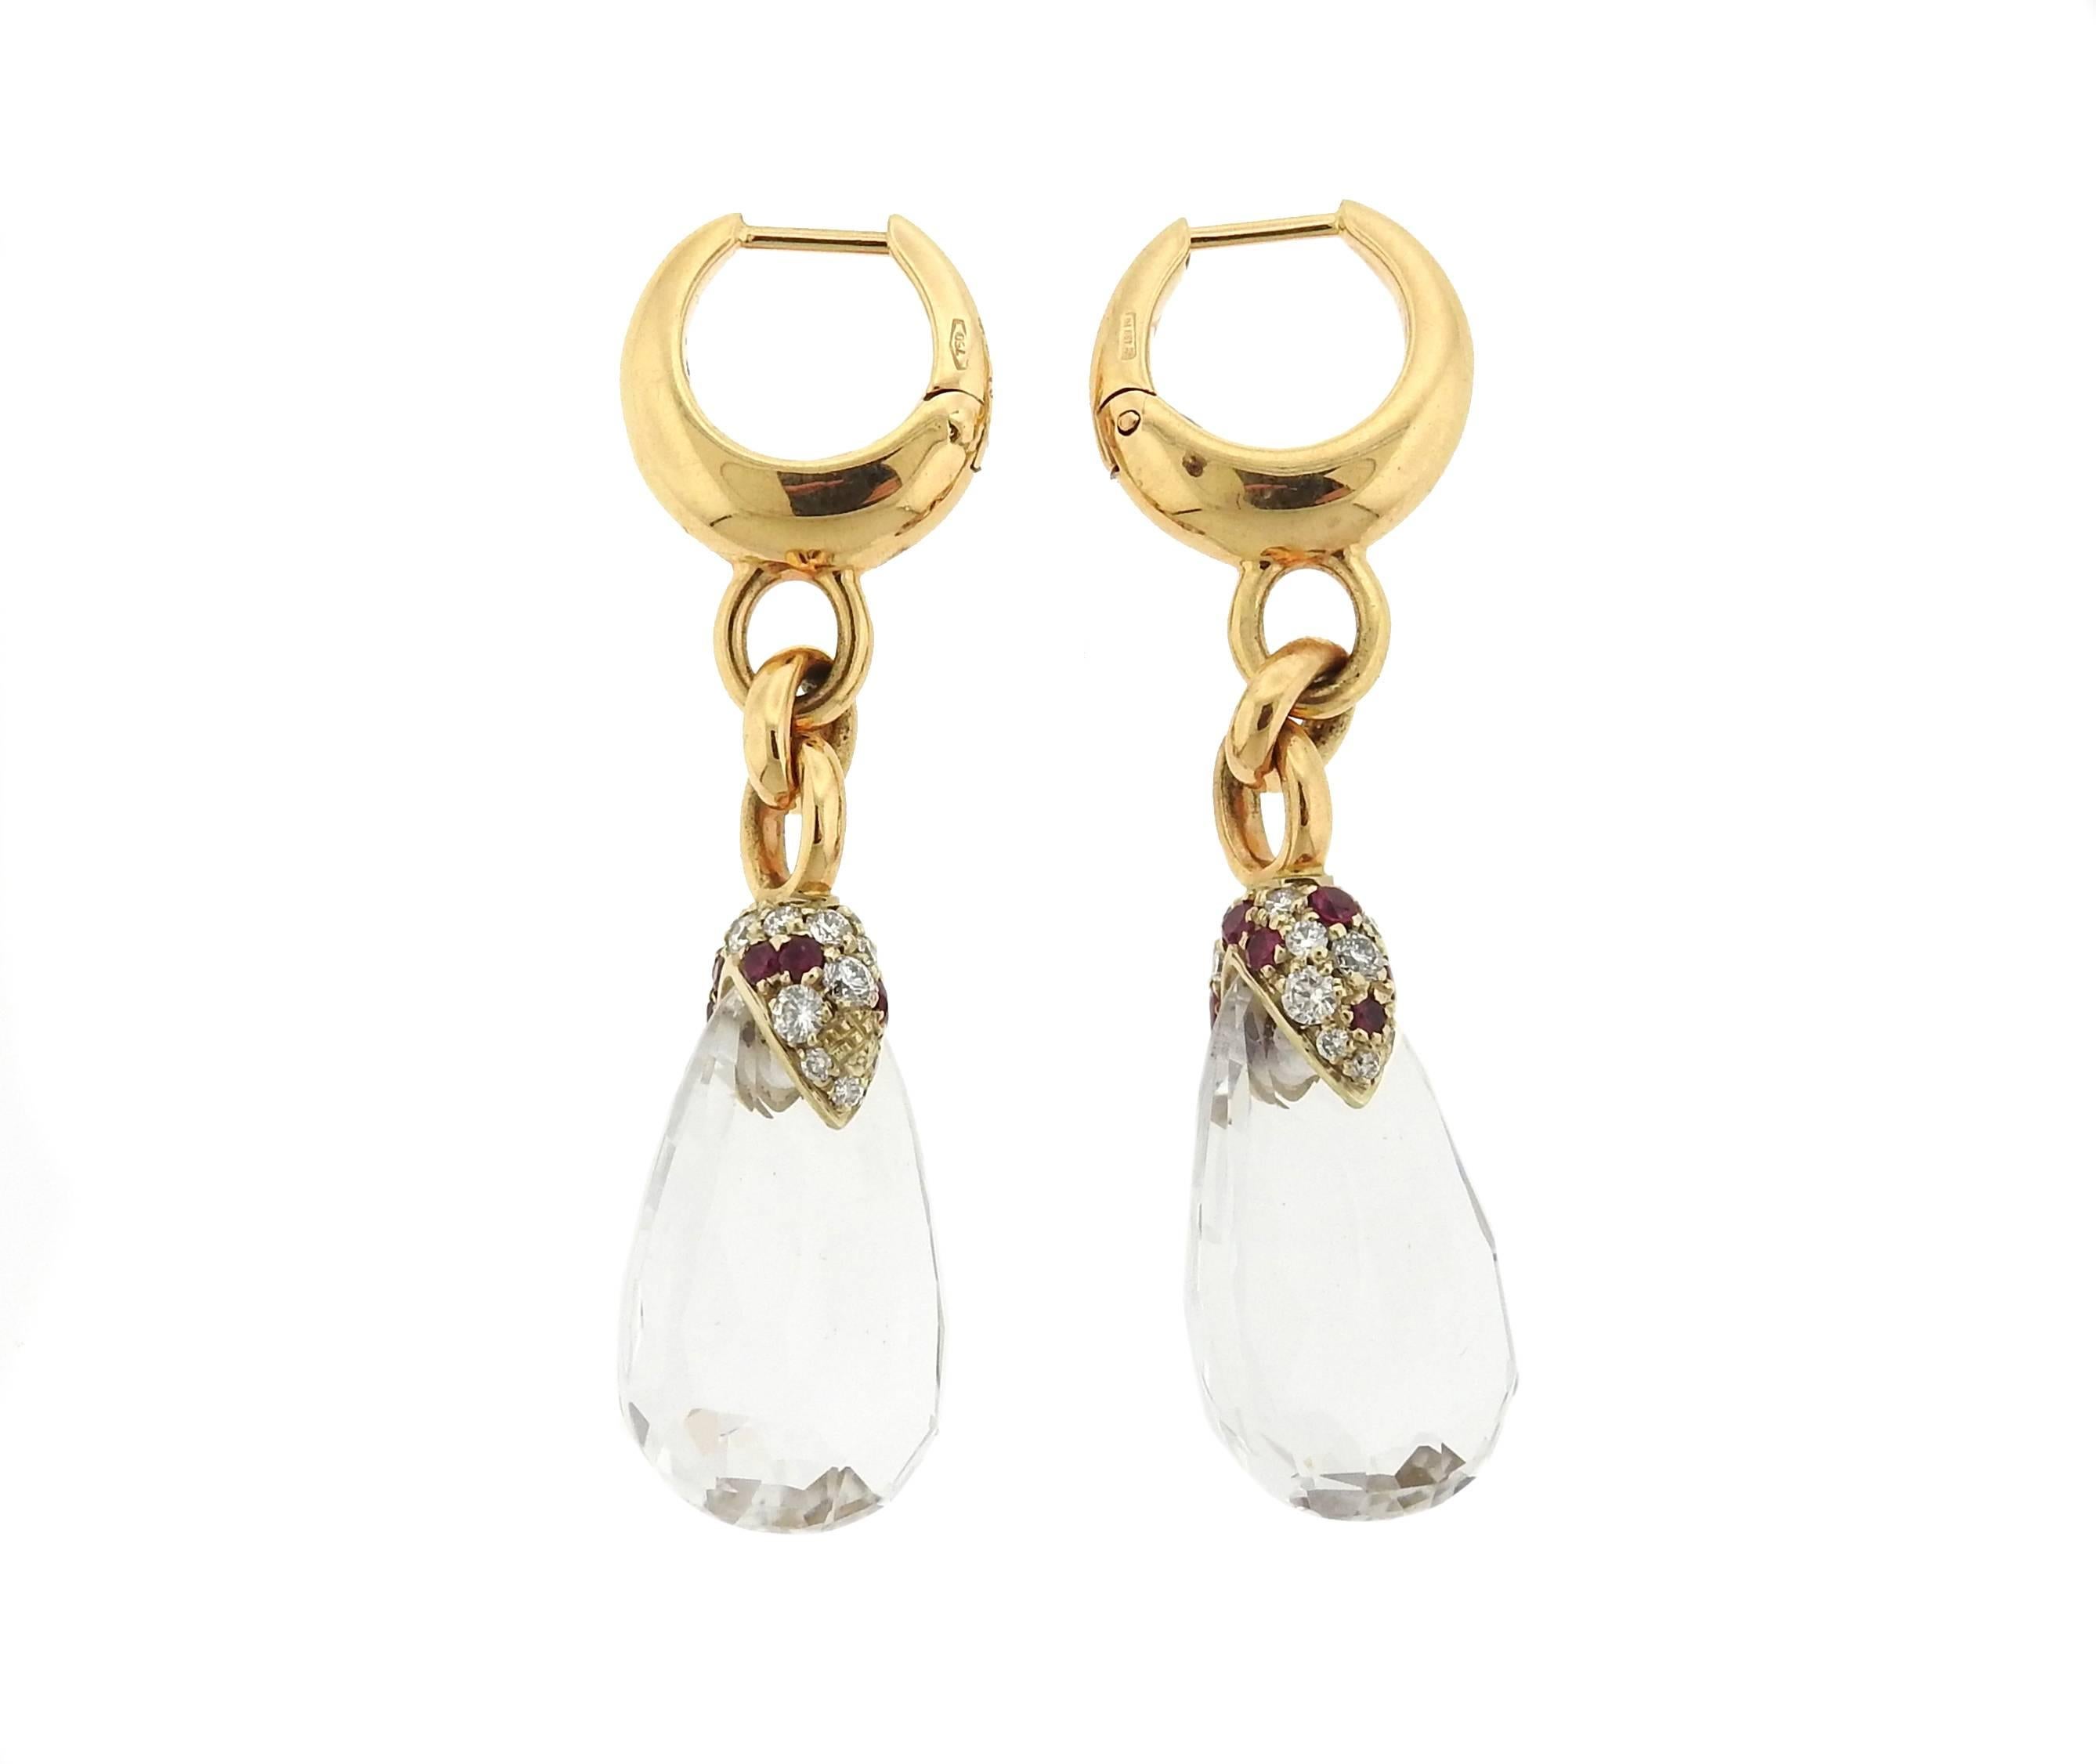 A pair of 18k gold drop earrings, crafted by Pomellato for Pin Up collection, set with quartz drops, rubies and diamonds. Earrings measure 46mm x 12.5mm and weight 14.2 grams